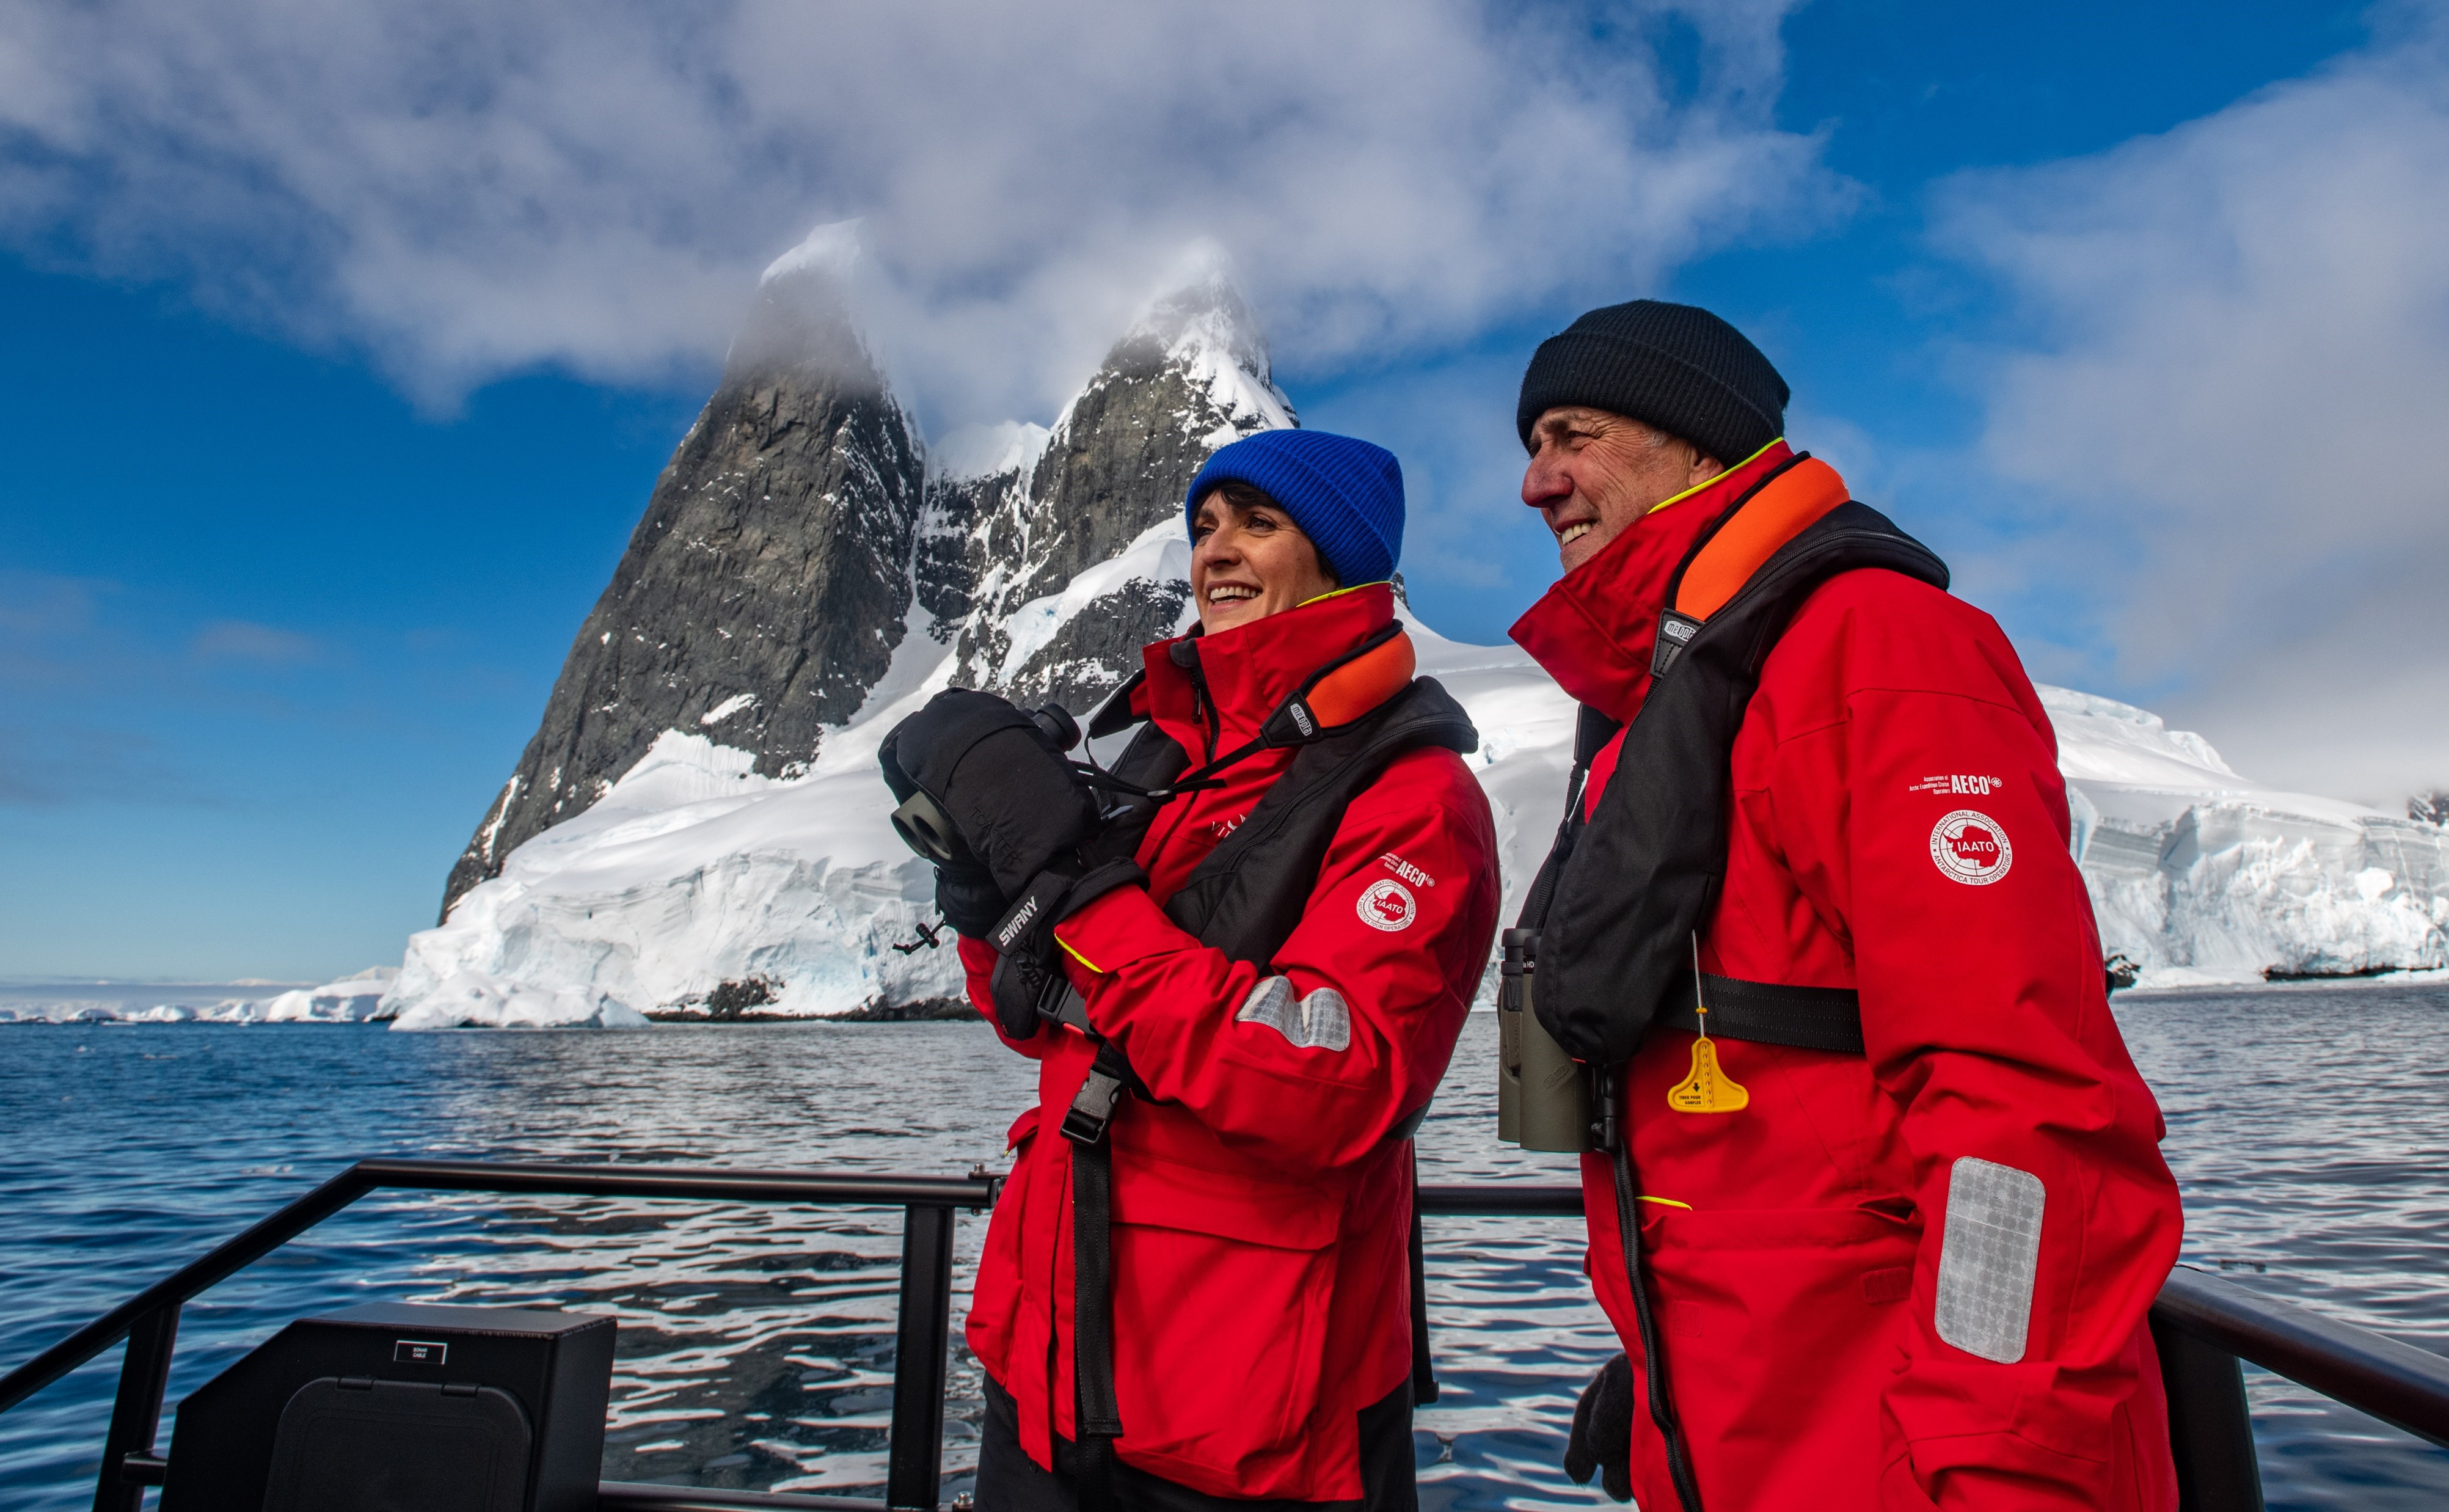 Viking recently announced its Viking Expedition Team has published a scientific paper documenting the Viking first Antarctic season 